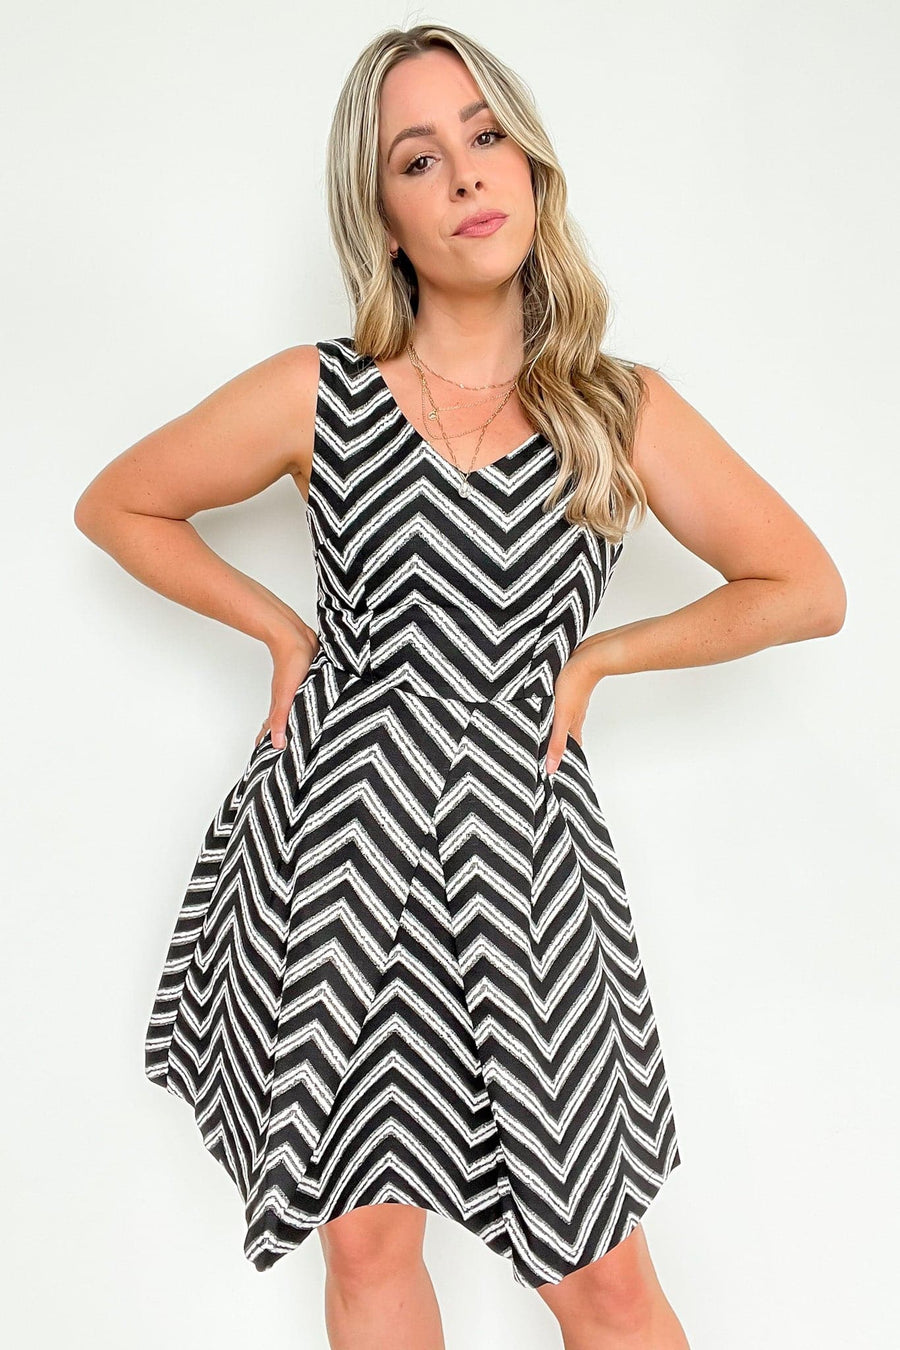  Nylie Chevron Fit and Flare Dress - FINAL SALE - Madison and Mallory